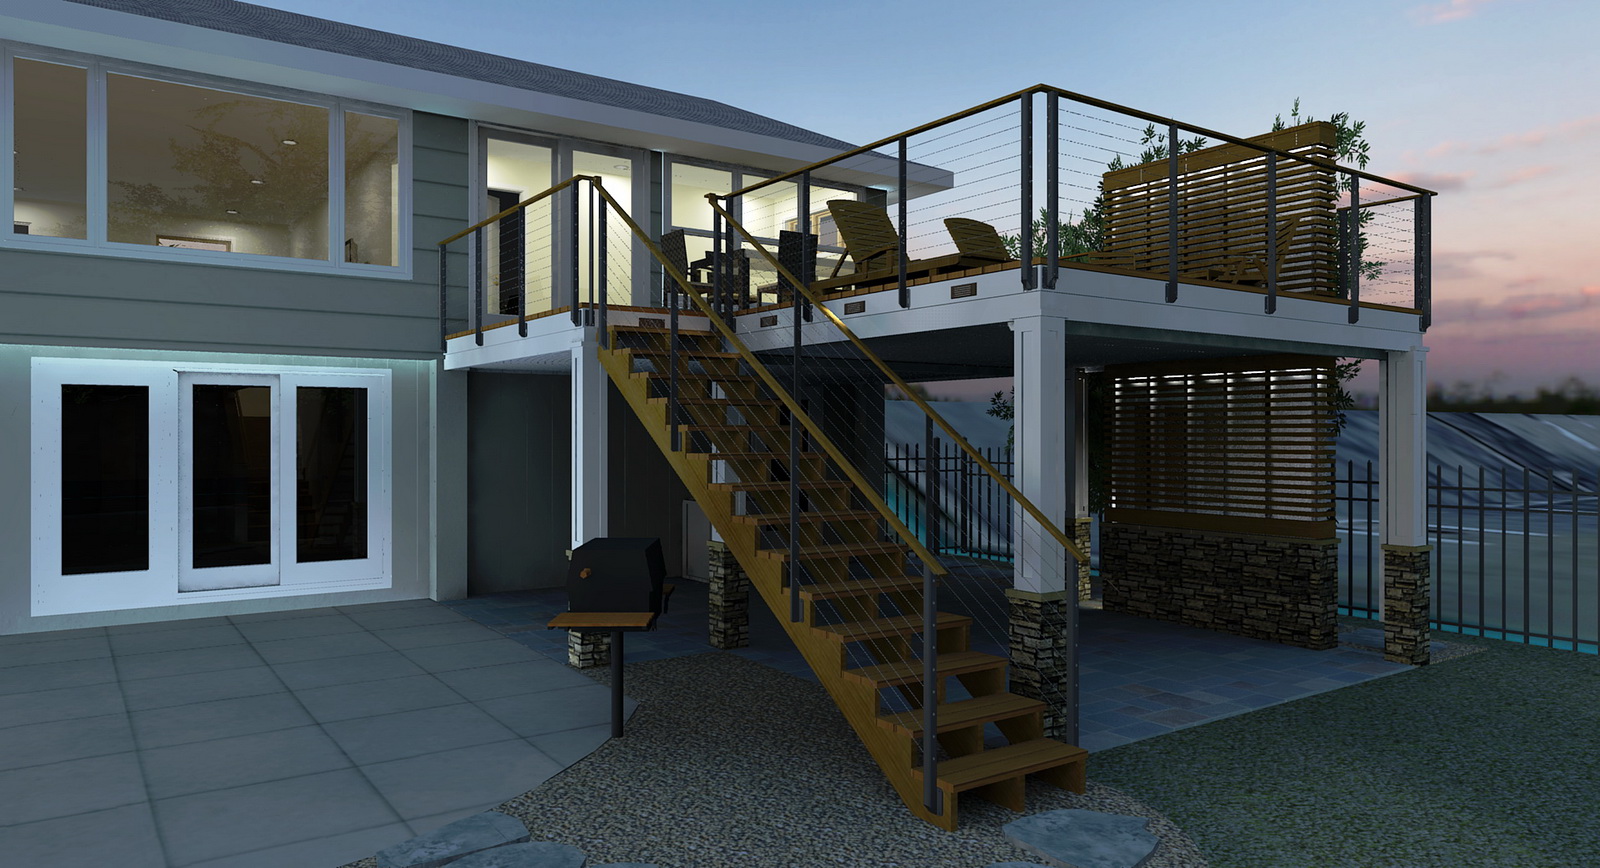 Deck Addition Twilight Render PP in PS to Increase COntrast